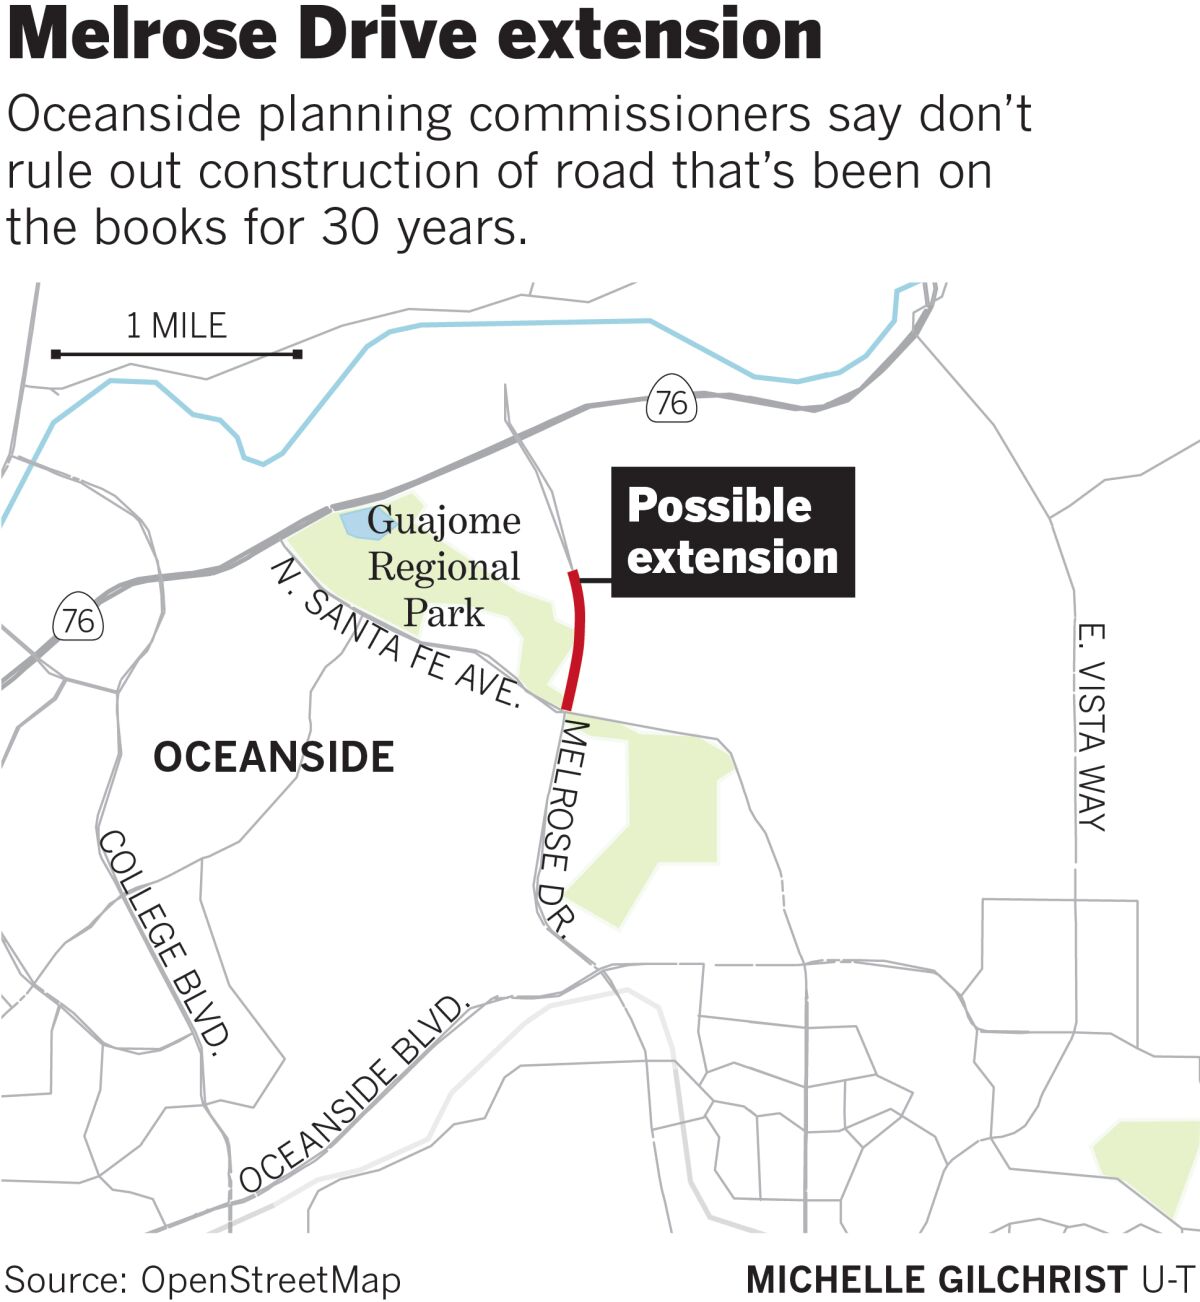 Oceanside's City Council has dropped the proposed Melrose Drive extension from the city's General Plan.